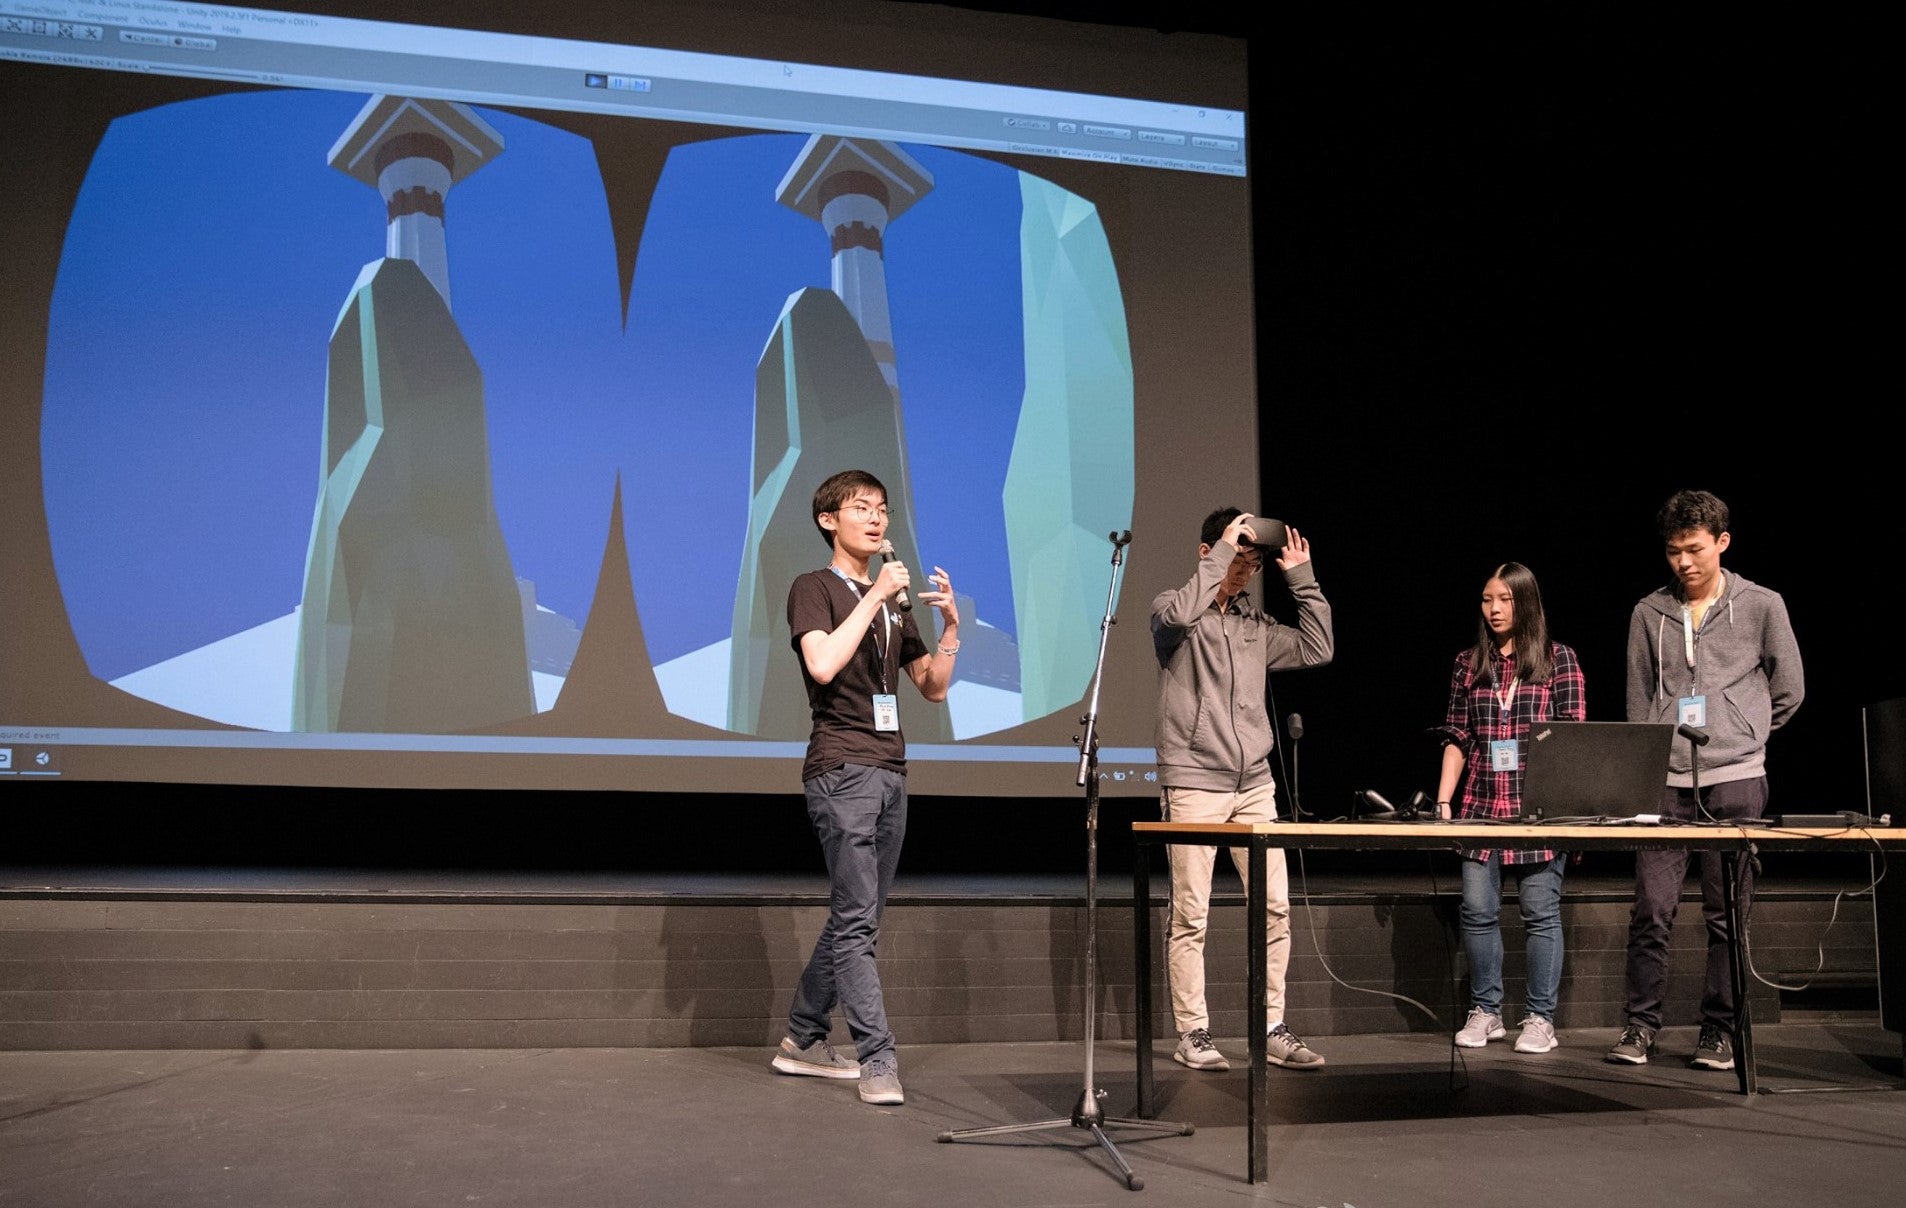 Students present their project at the last in-person Hack the North in 2019.